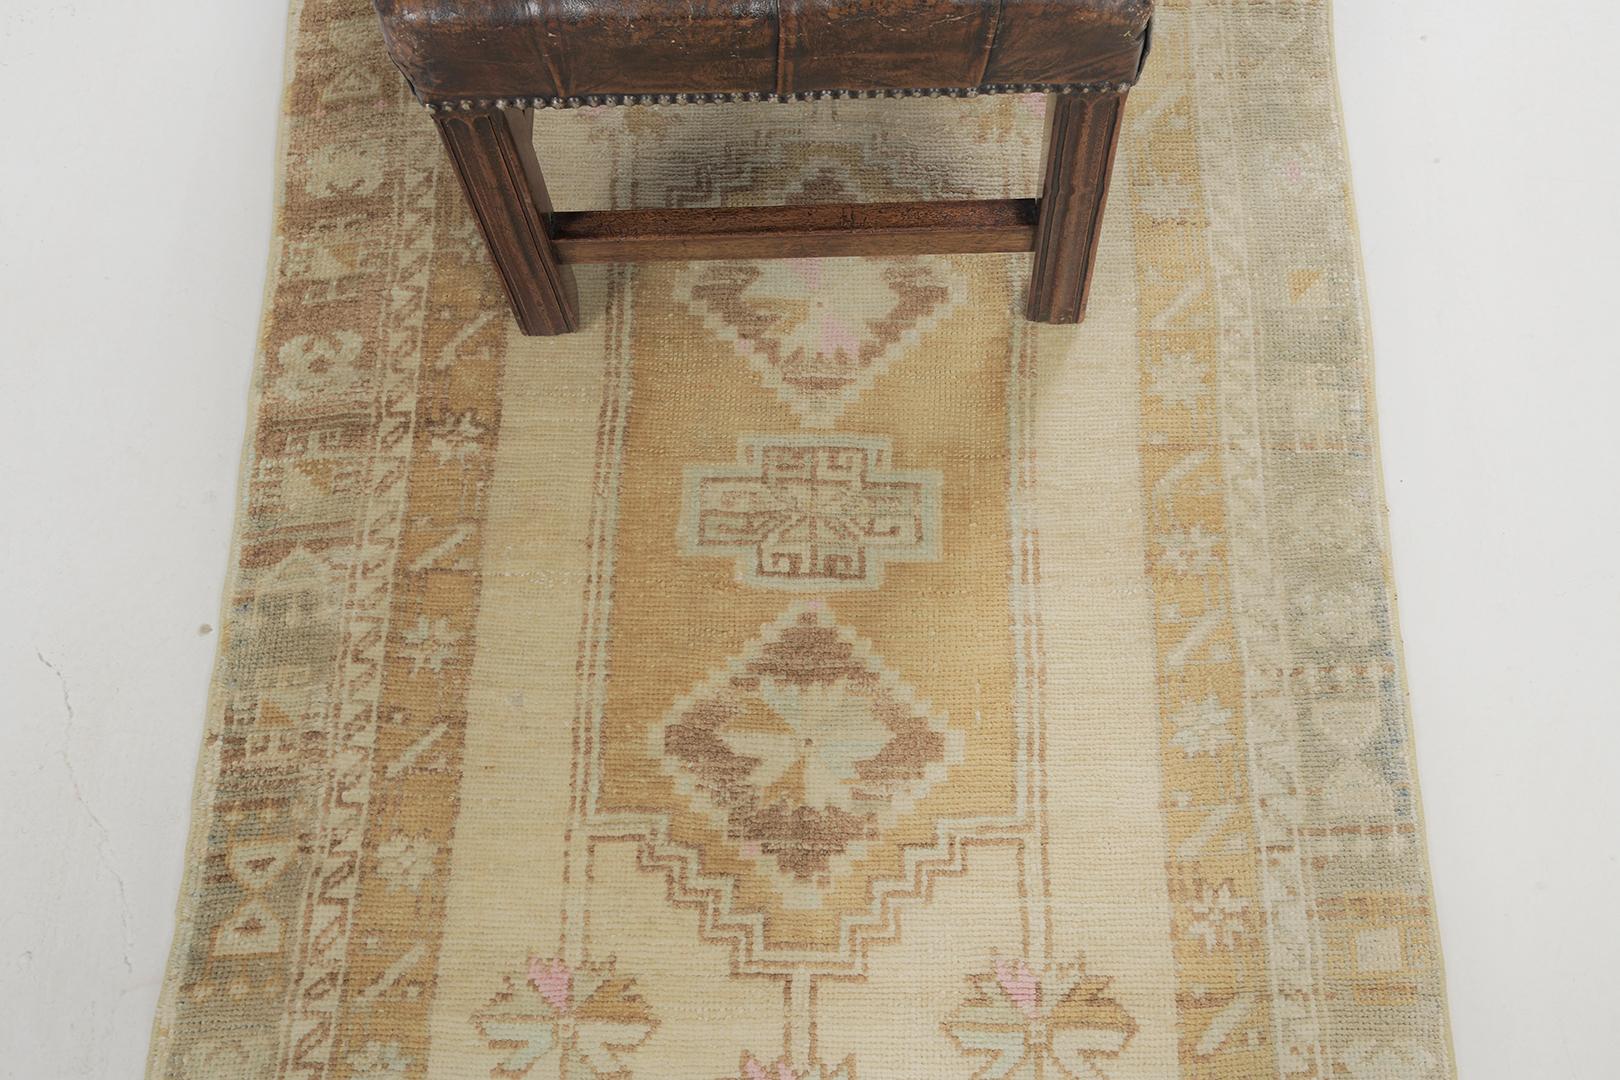 Through its simplicity, this will make your contemporary space more elegant with this neutral-toned Anadol rug from our Vintage Collection. Ornate borders with Anatolian symbolic designs are featured in a field of cream to make the rug more classic